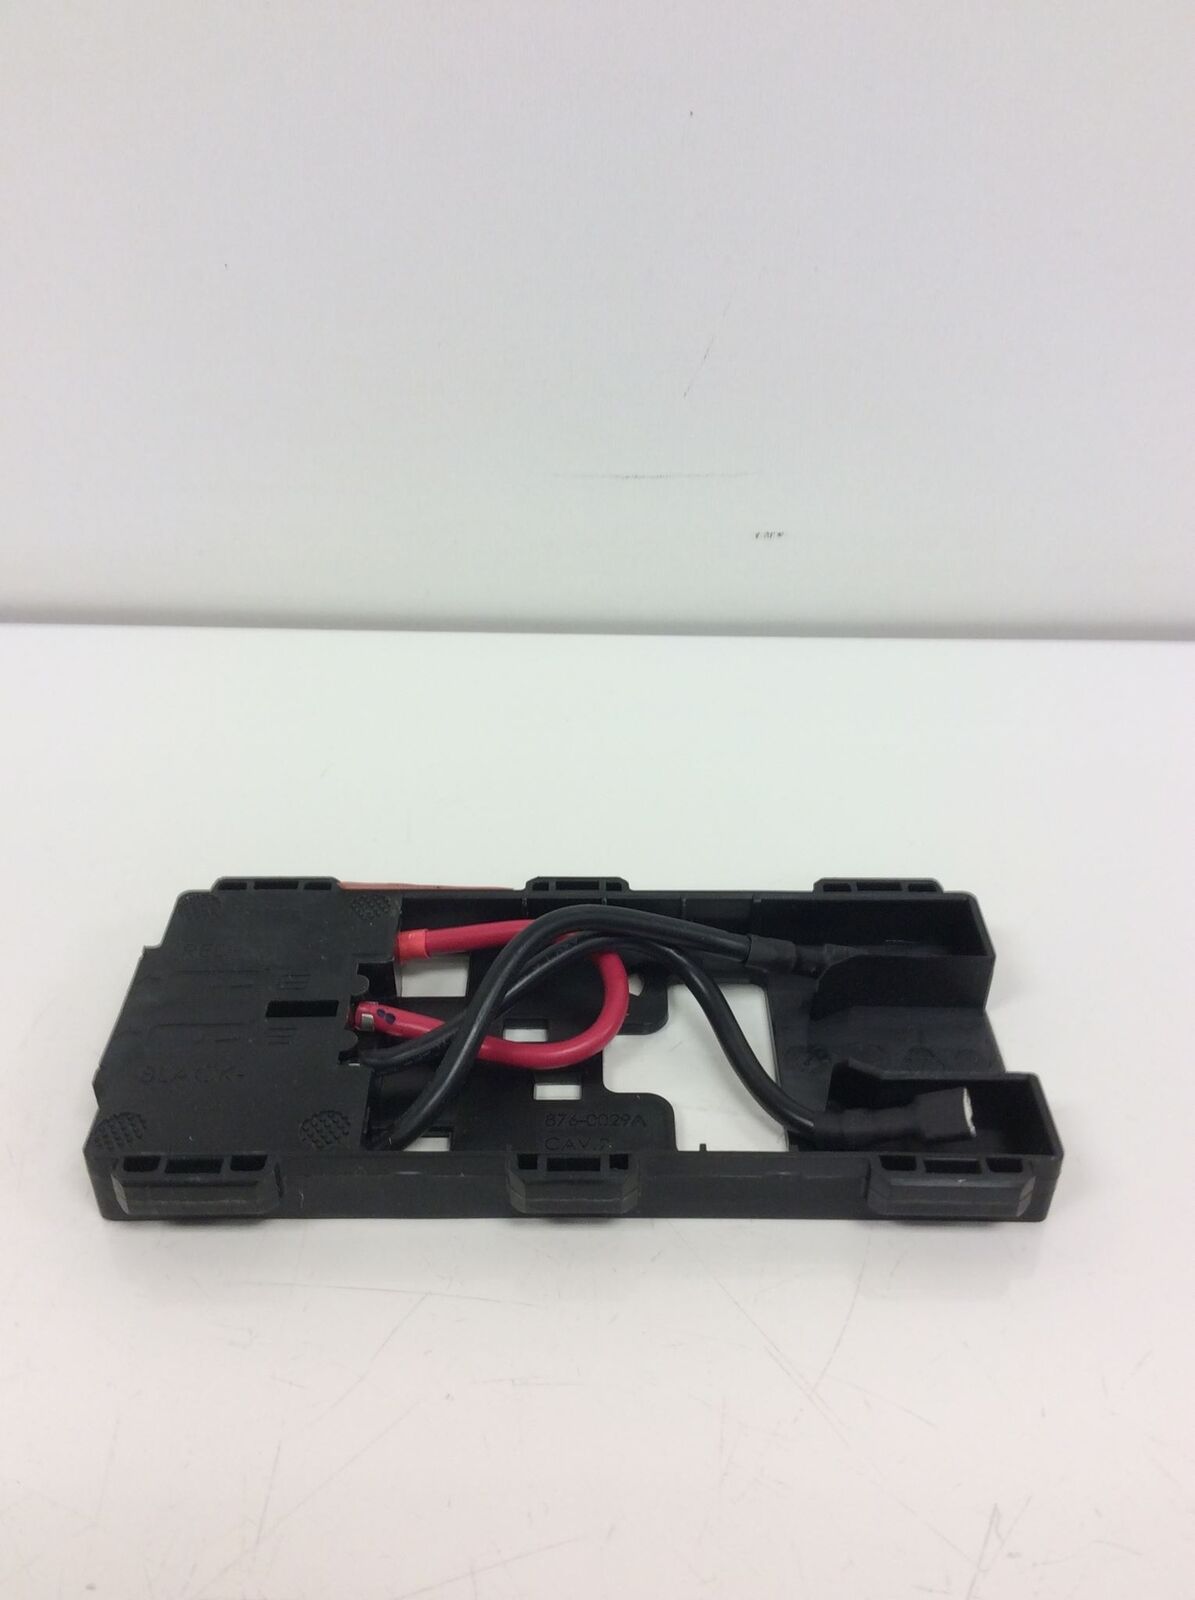 APC BR1000G 1500G Back-UPS Pro 1000 1500 Power Supply Battery Tray with Cables